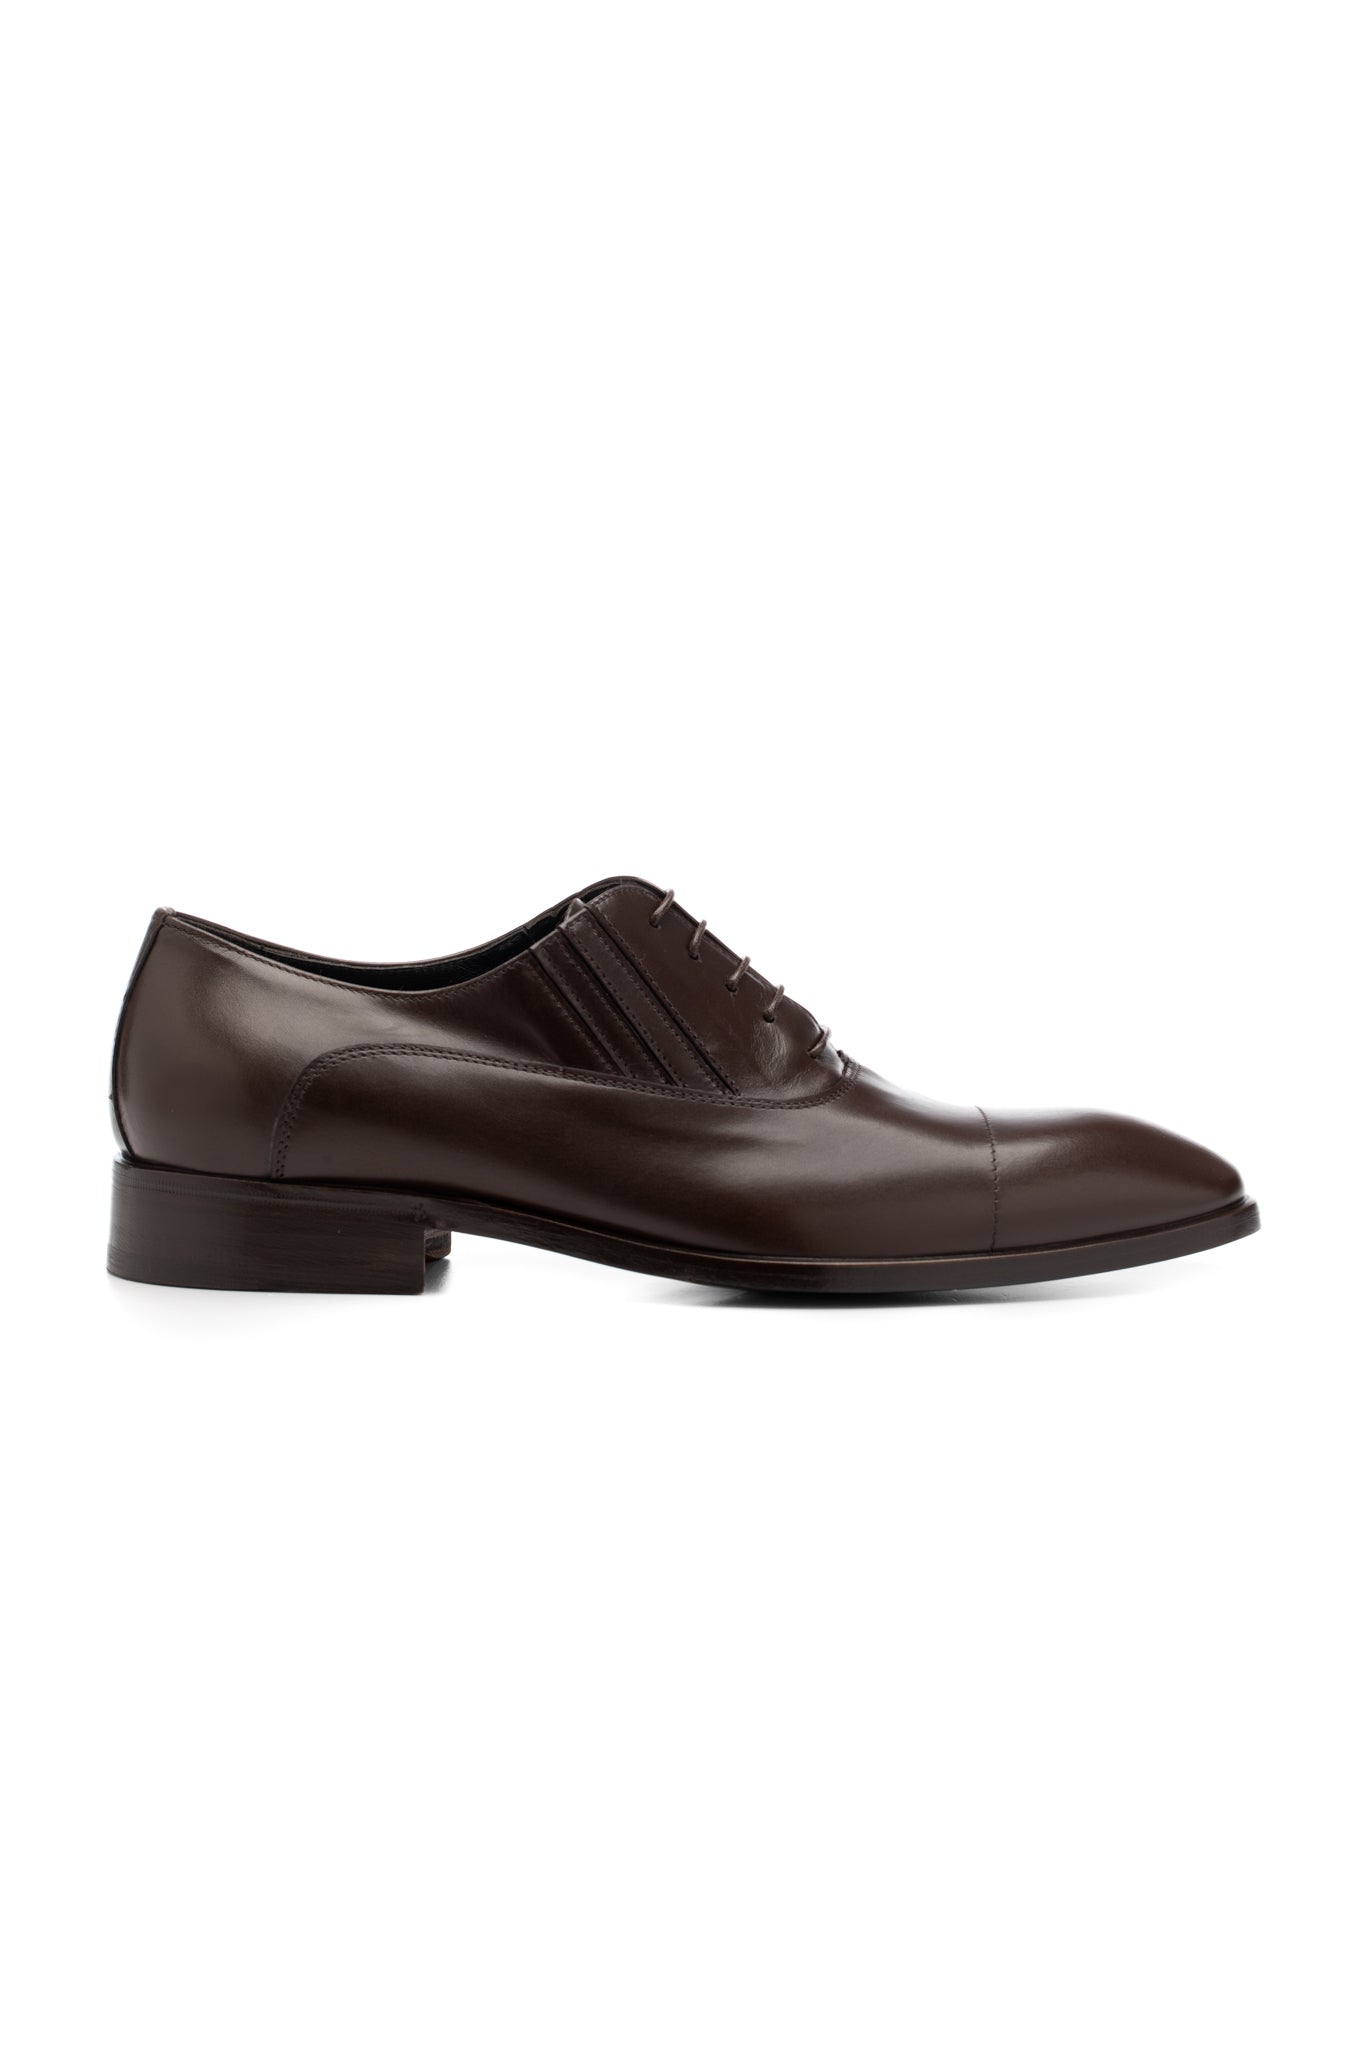 Brown oxford business shoes